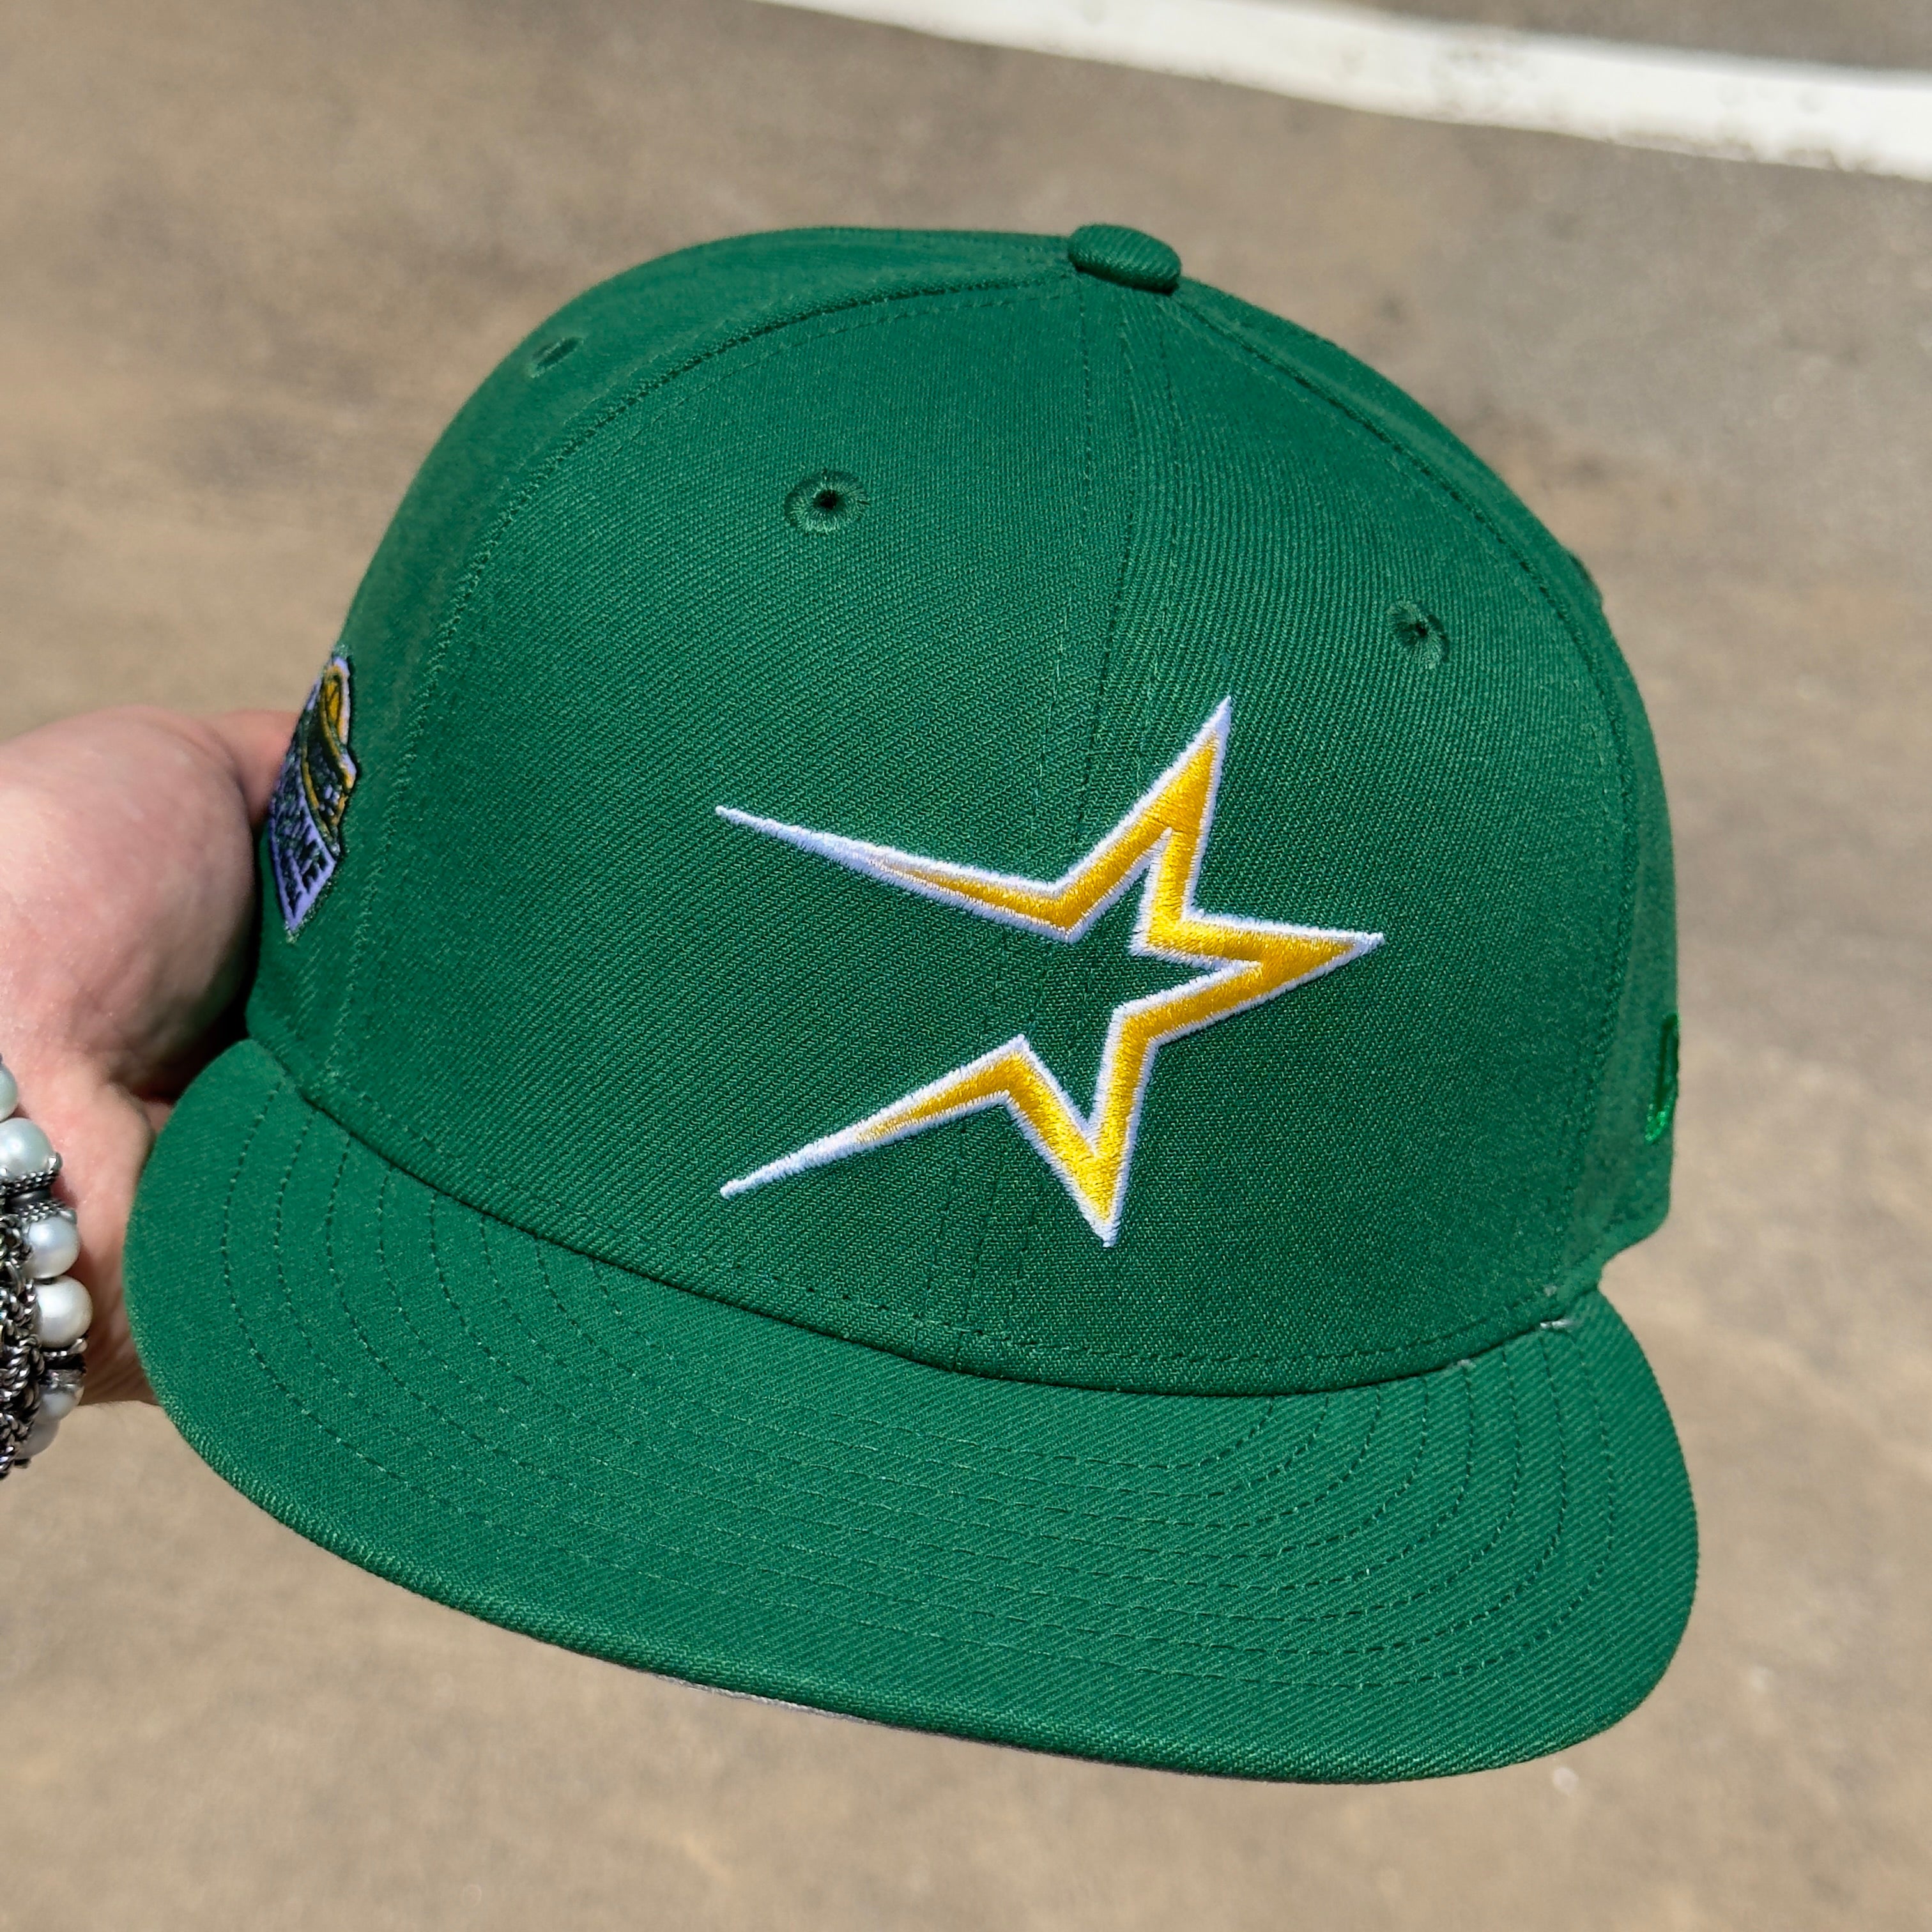 1/2 NEW Green Houston Astros Astrodome Original Hatclub 59fifty New Era Fitted Hat Cap